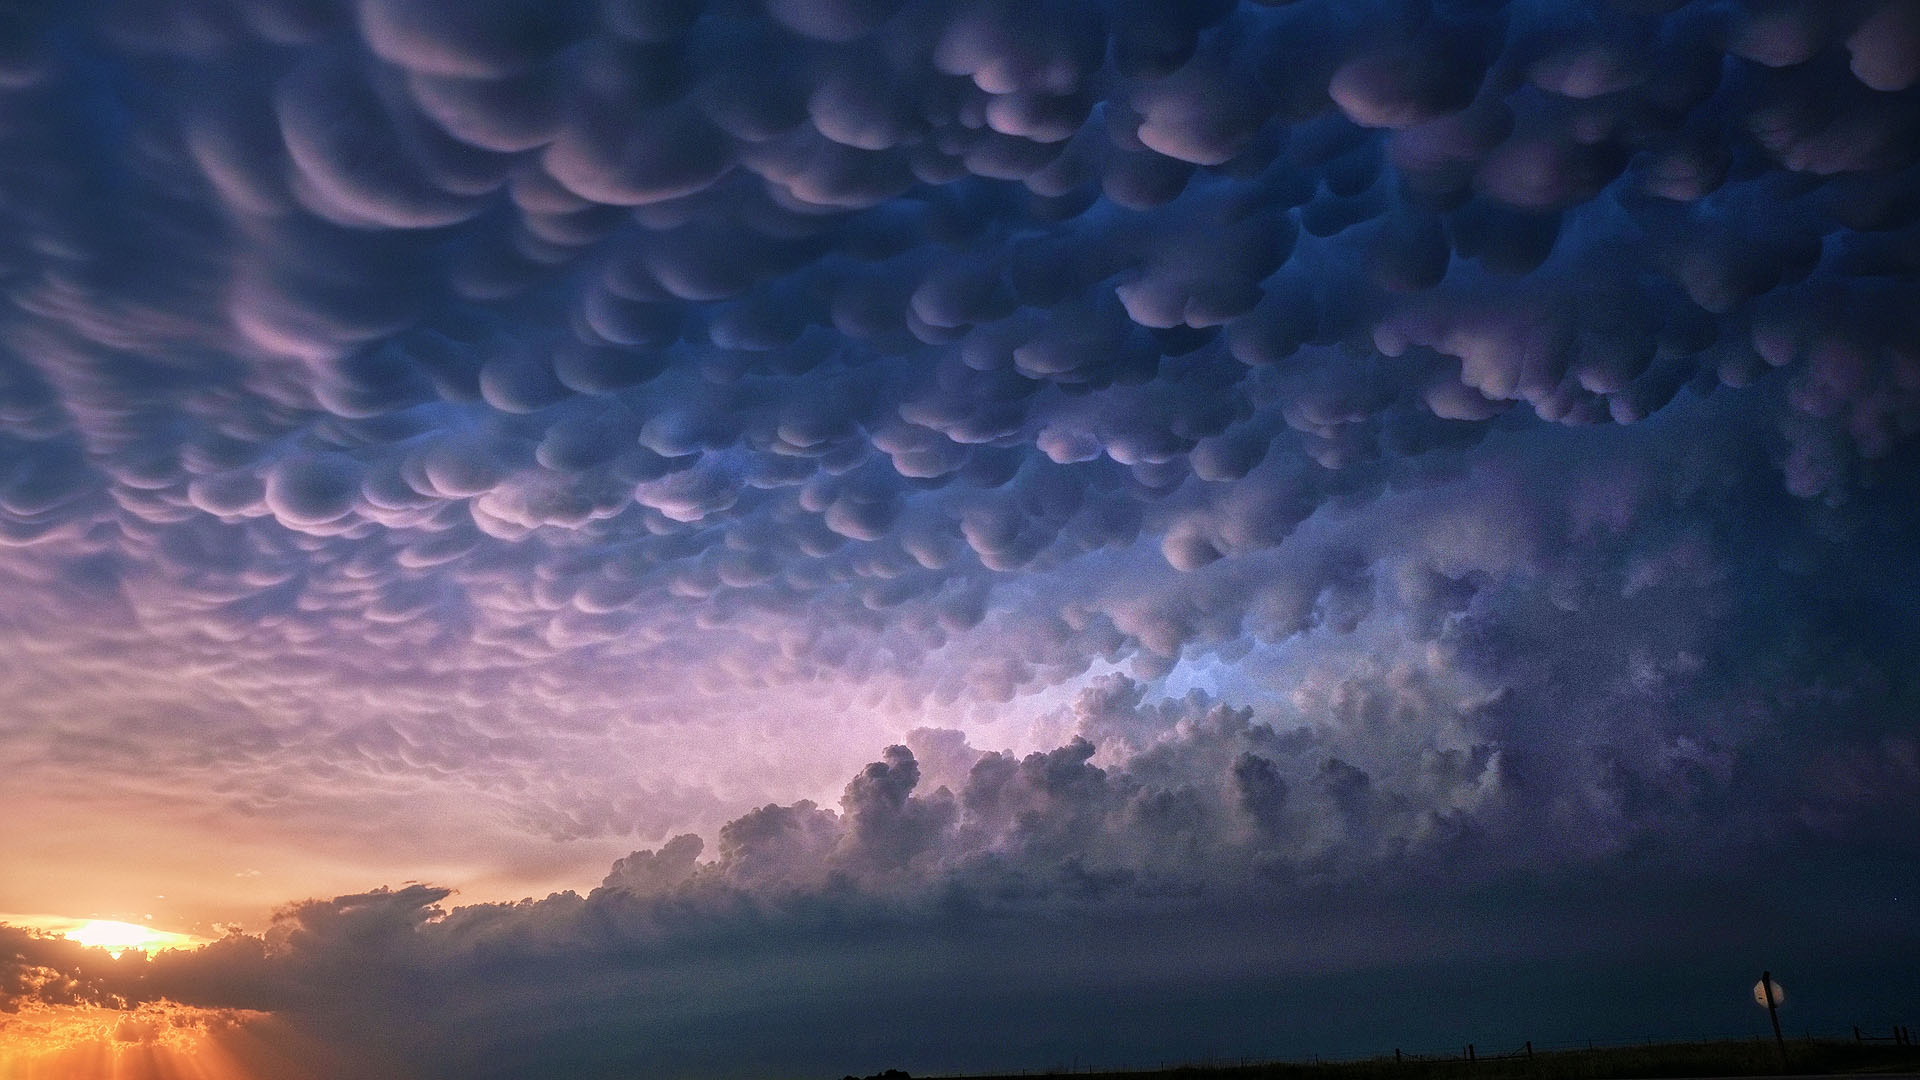 Setting sun and storm cloud layers including mammatus clouds